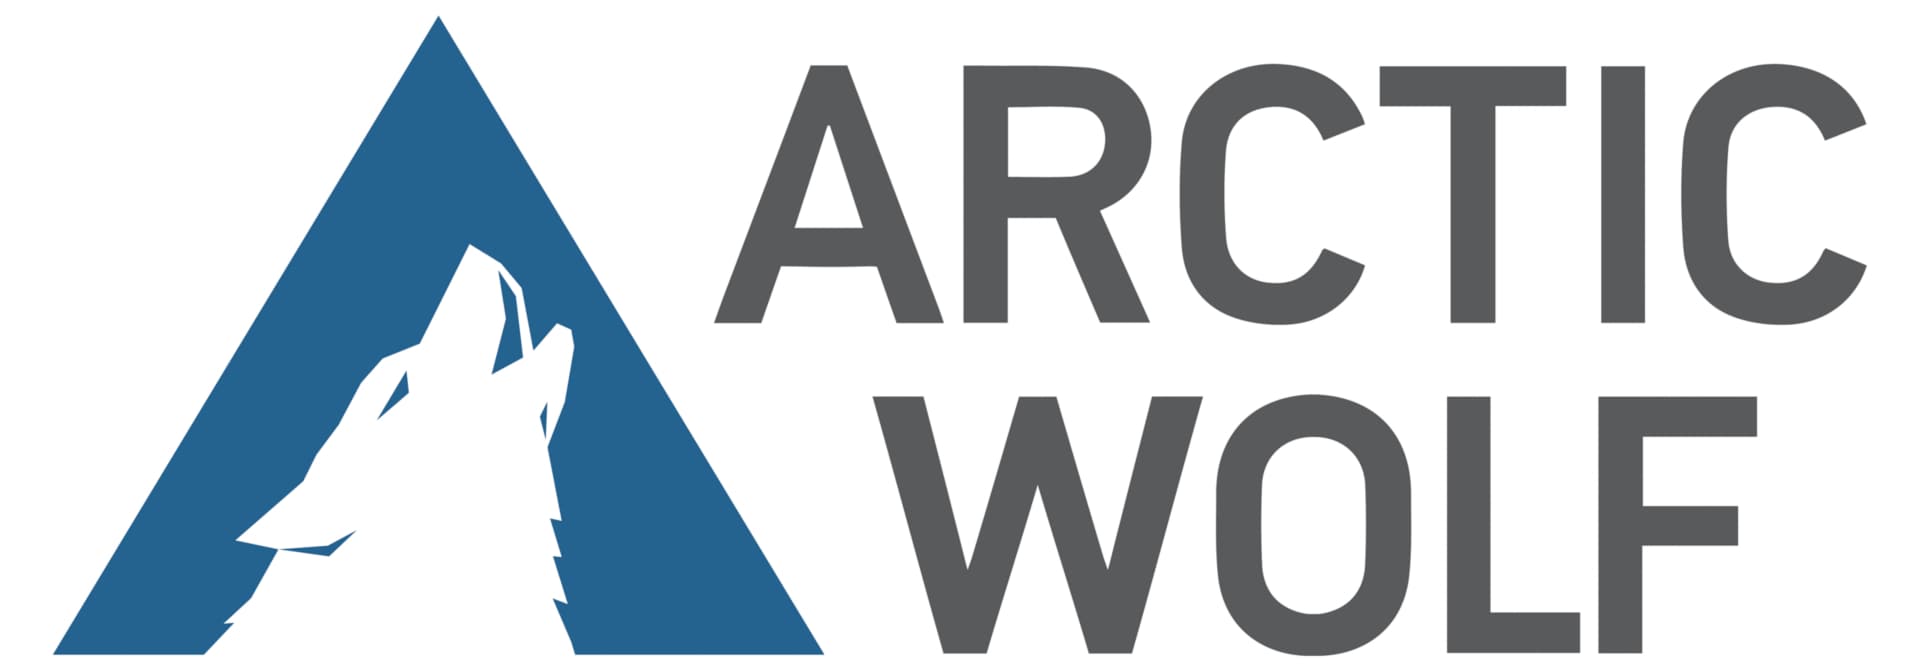 Arctic Wolf Managed Detection and Response - subscription license (2 years) - 1 license